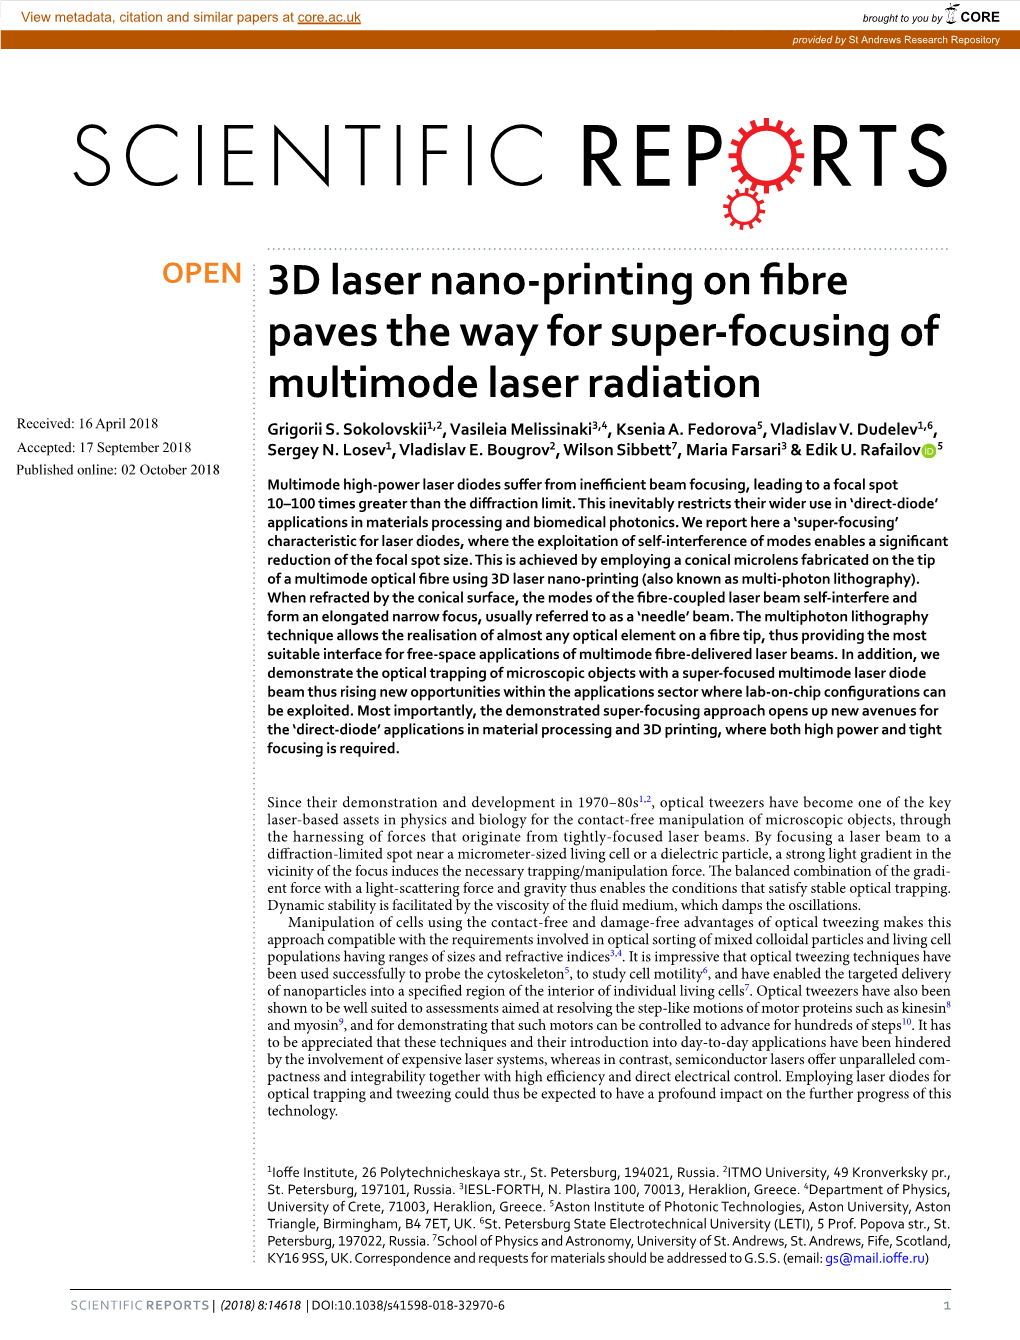 3D Laser Nano-Printing on Fibre Paves the Way for Super-Focusing of Multimode Laser Radiation